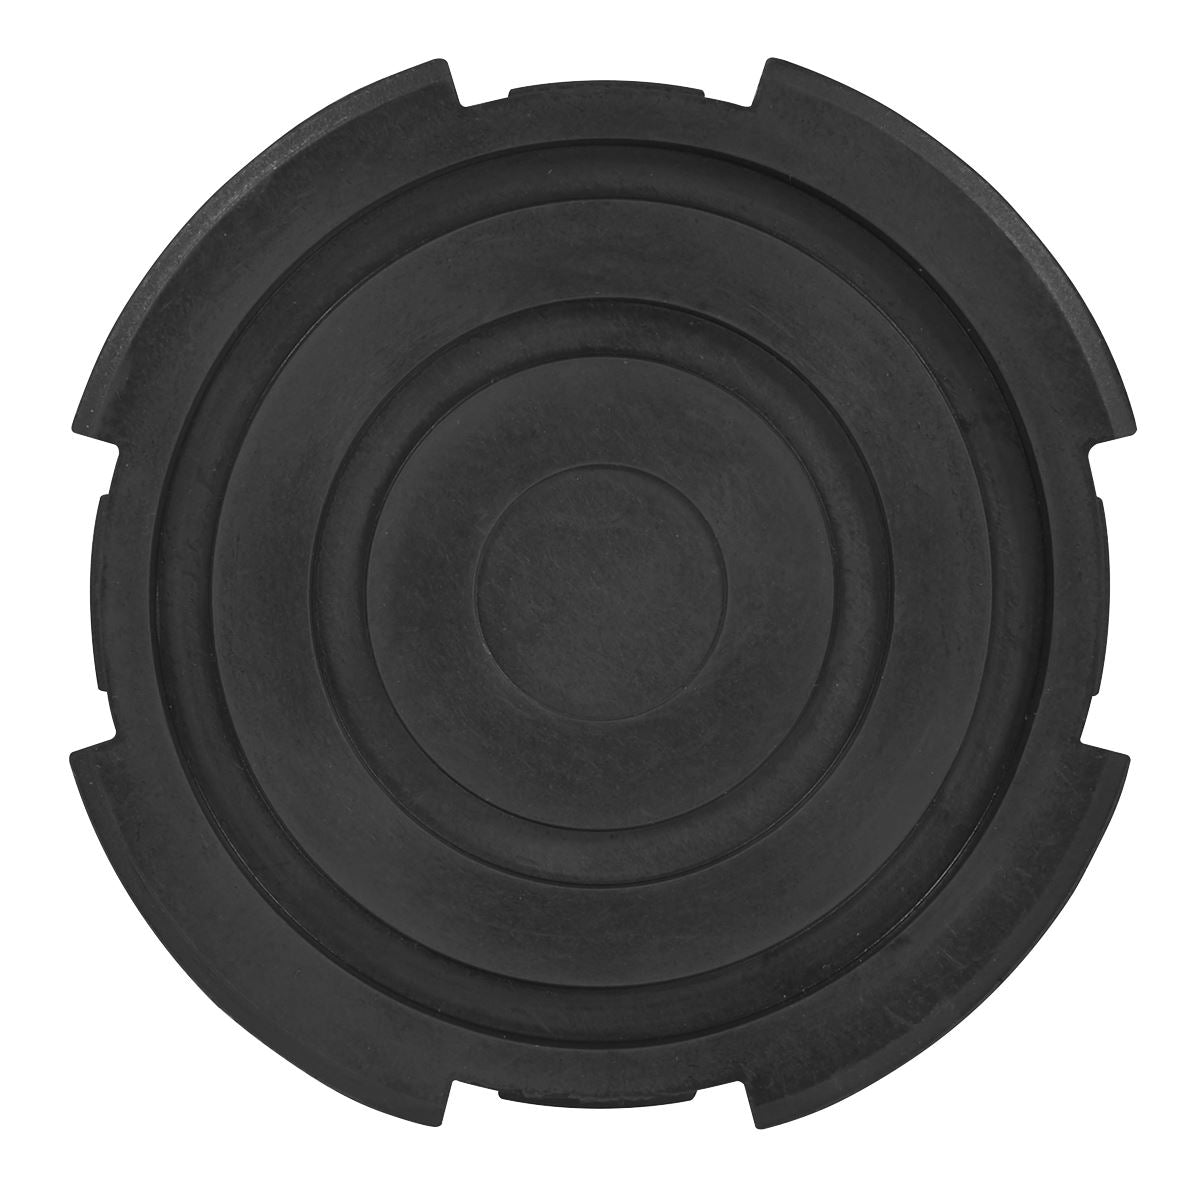 Sealey Safety Rubber Jack Pad - Type B